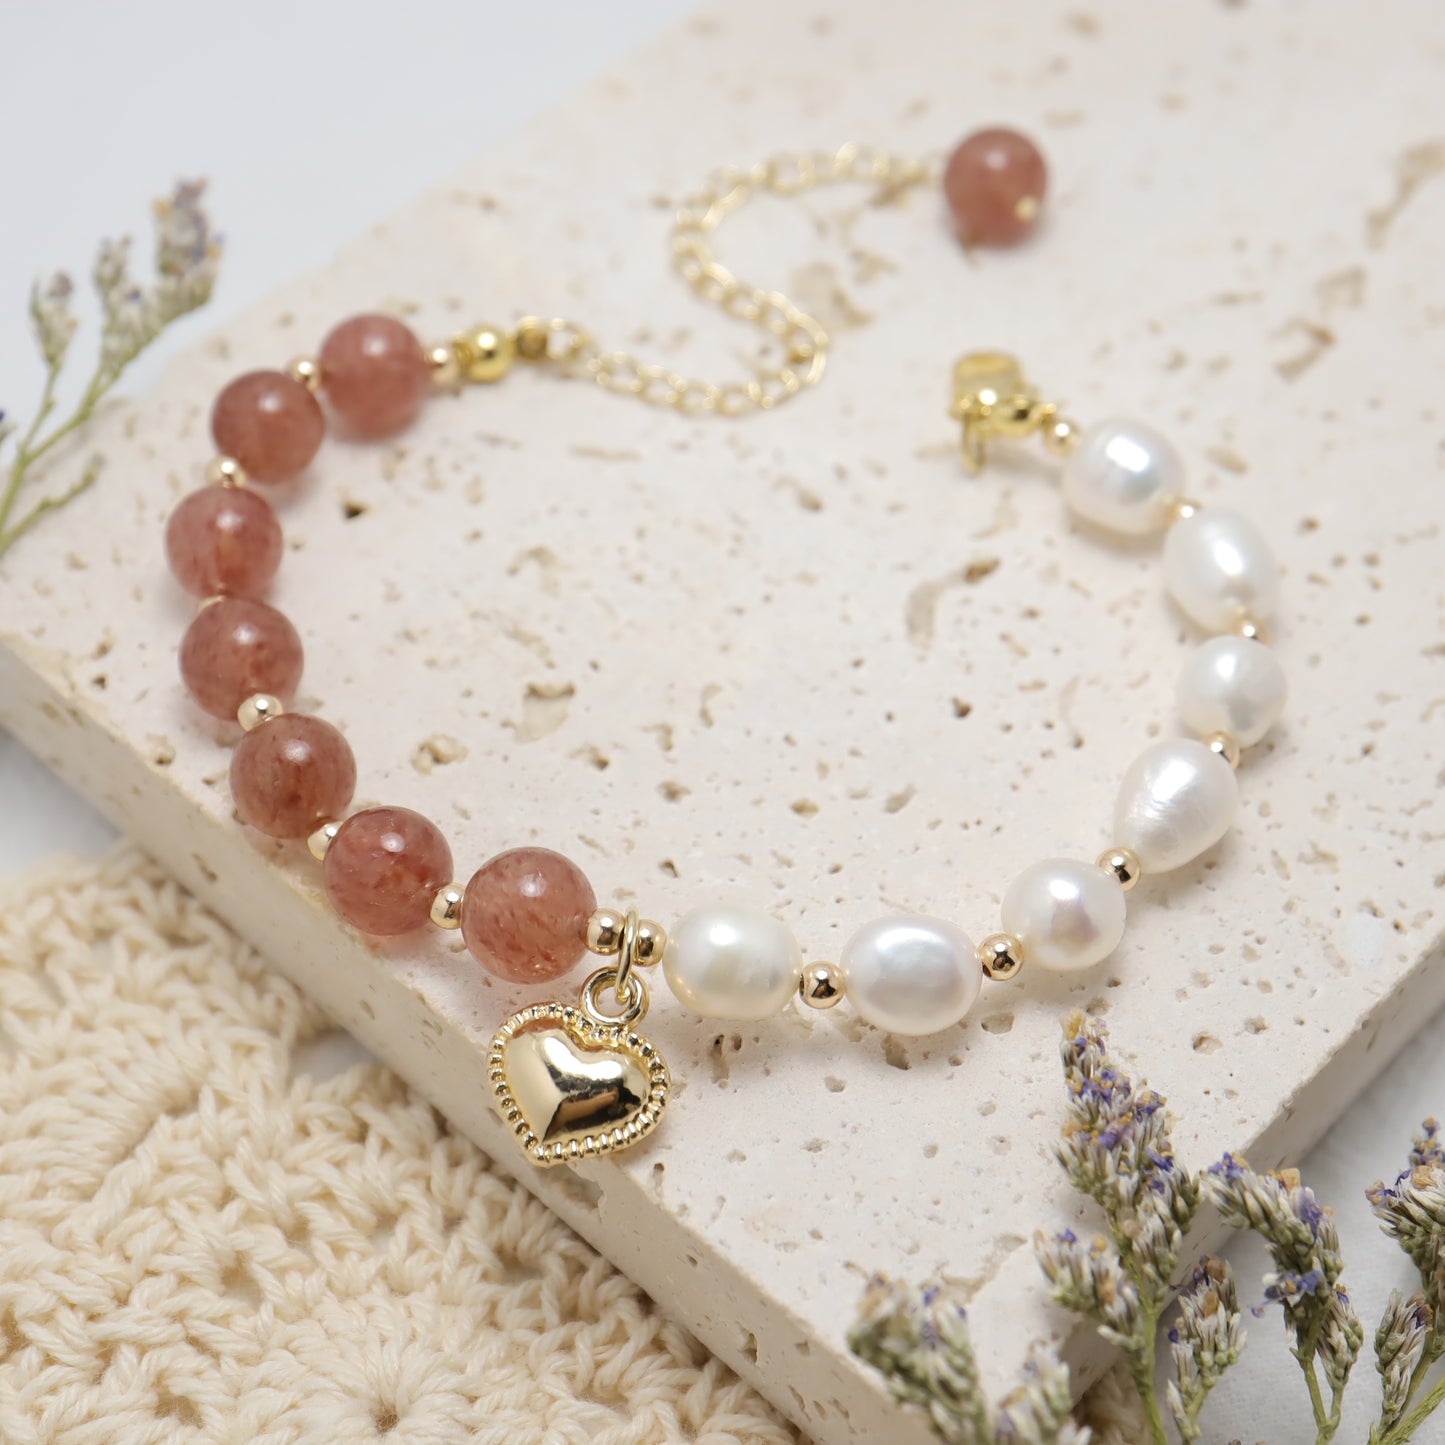 Only U - Heart Drop Strawberry Quartz & Freshwater Pearl Bracelet with Adjustable Chain